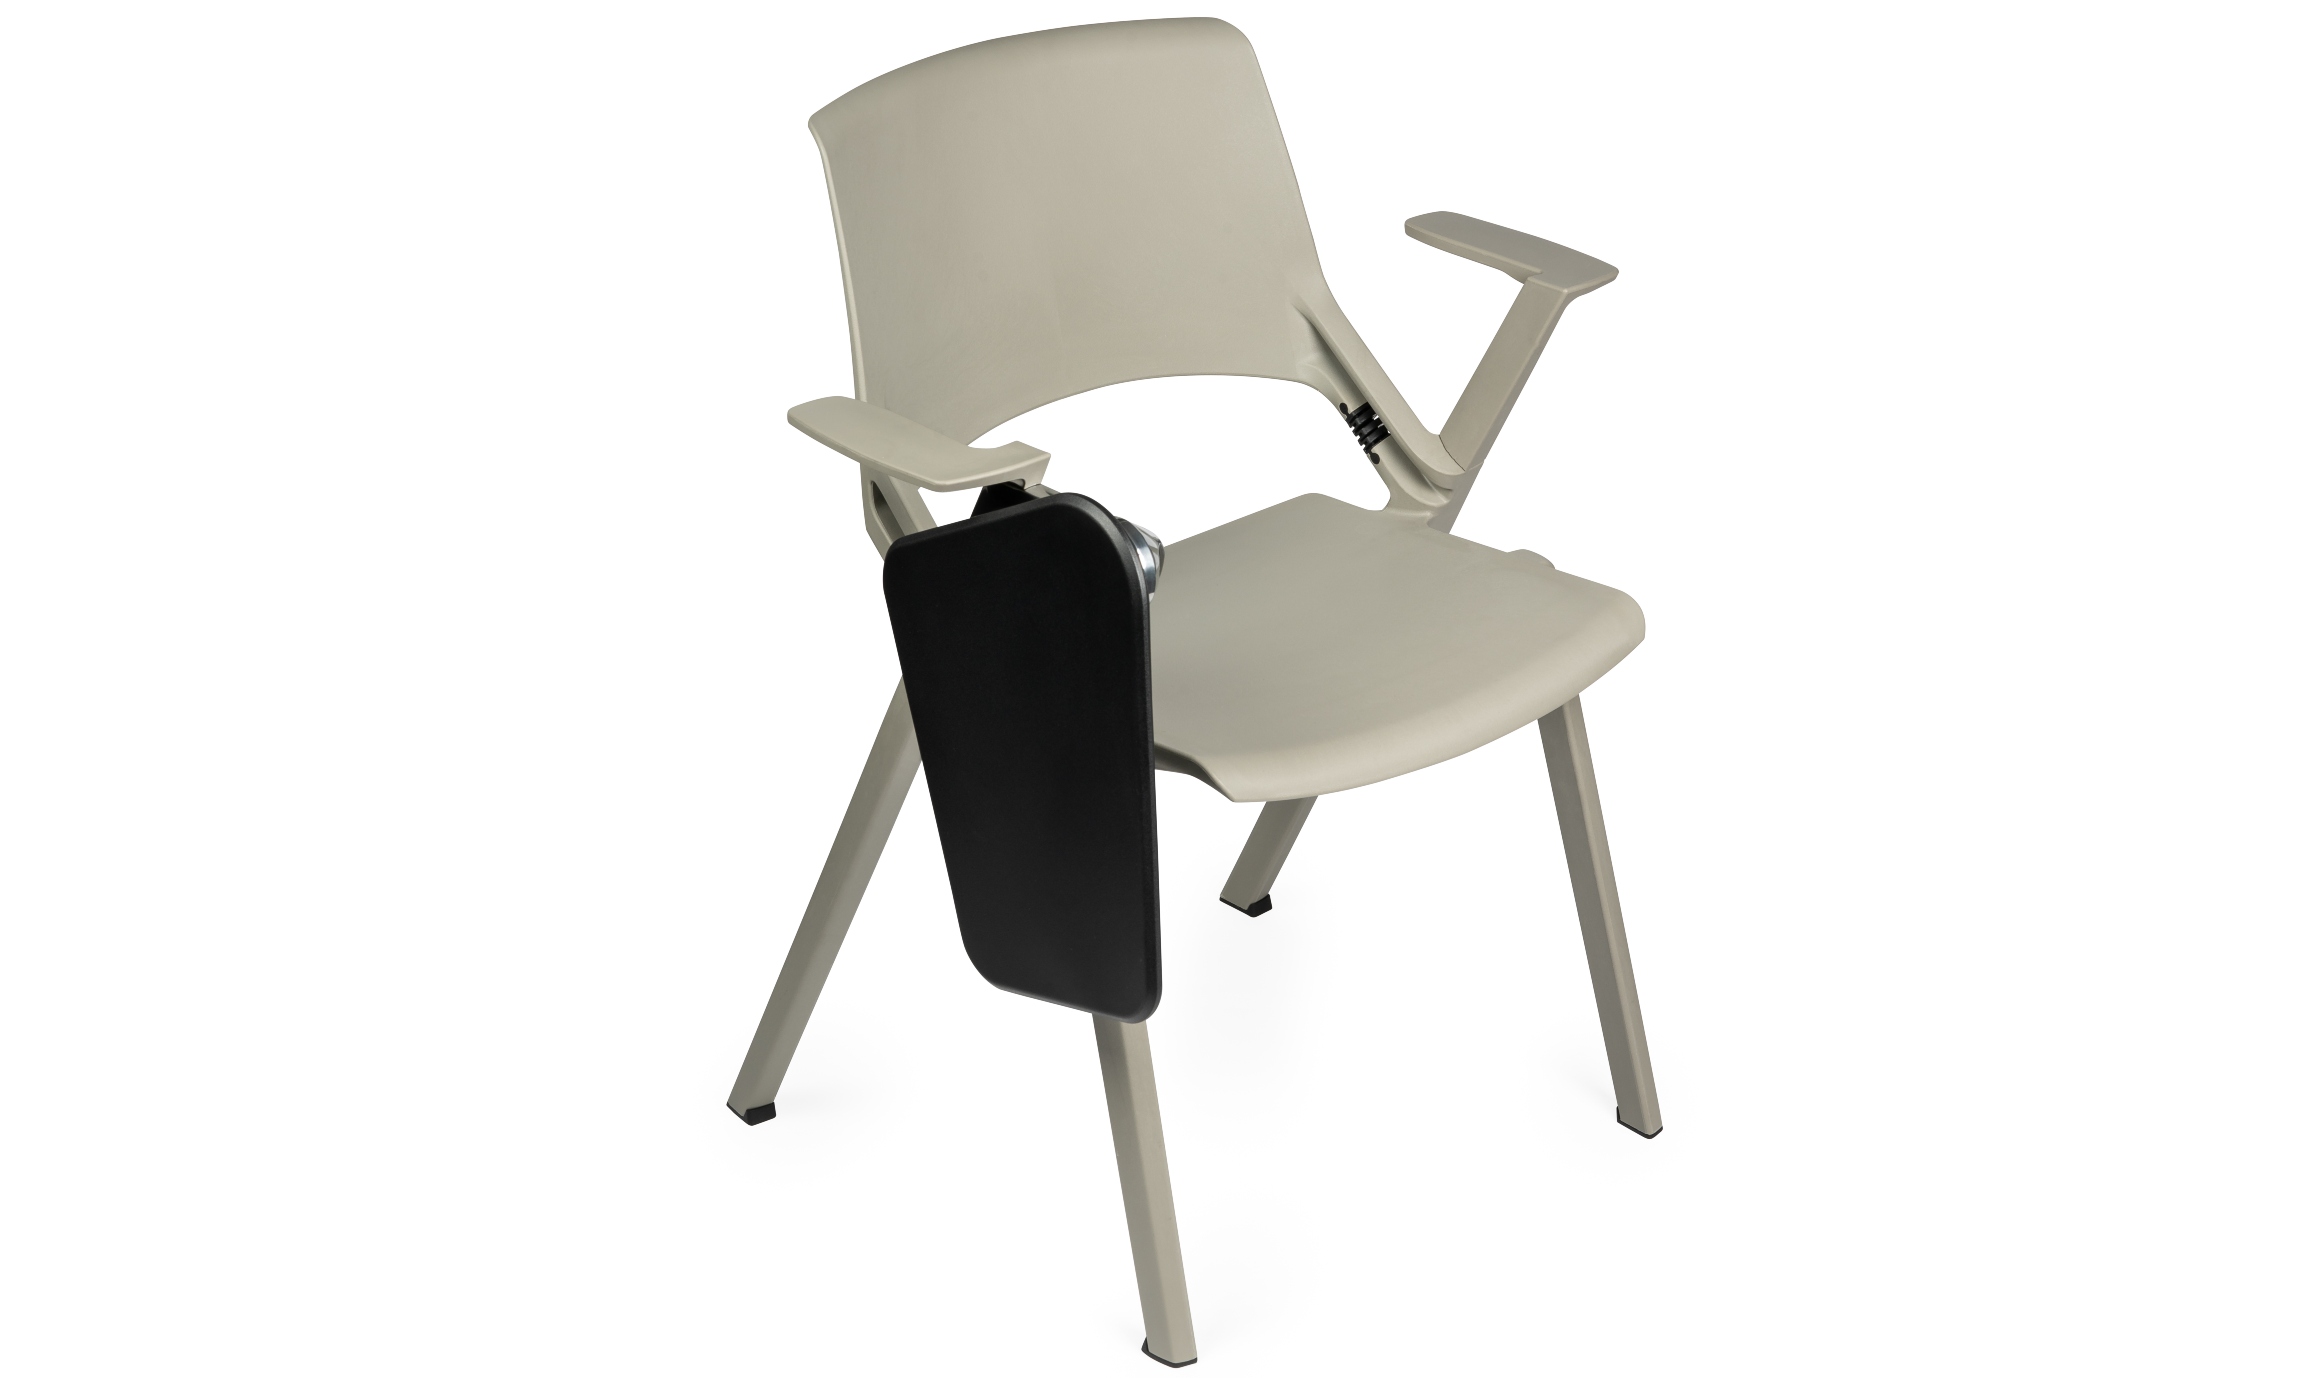 KI launches new Myke stacking tablet arm chair for dynamic learning spaces